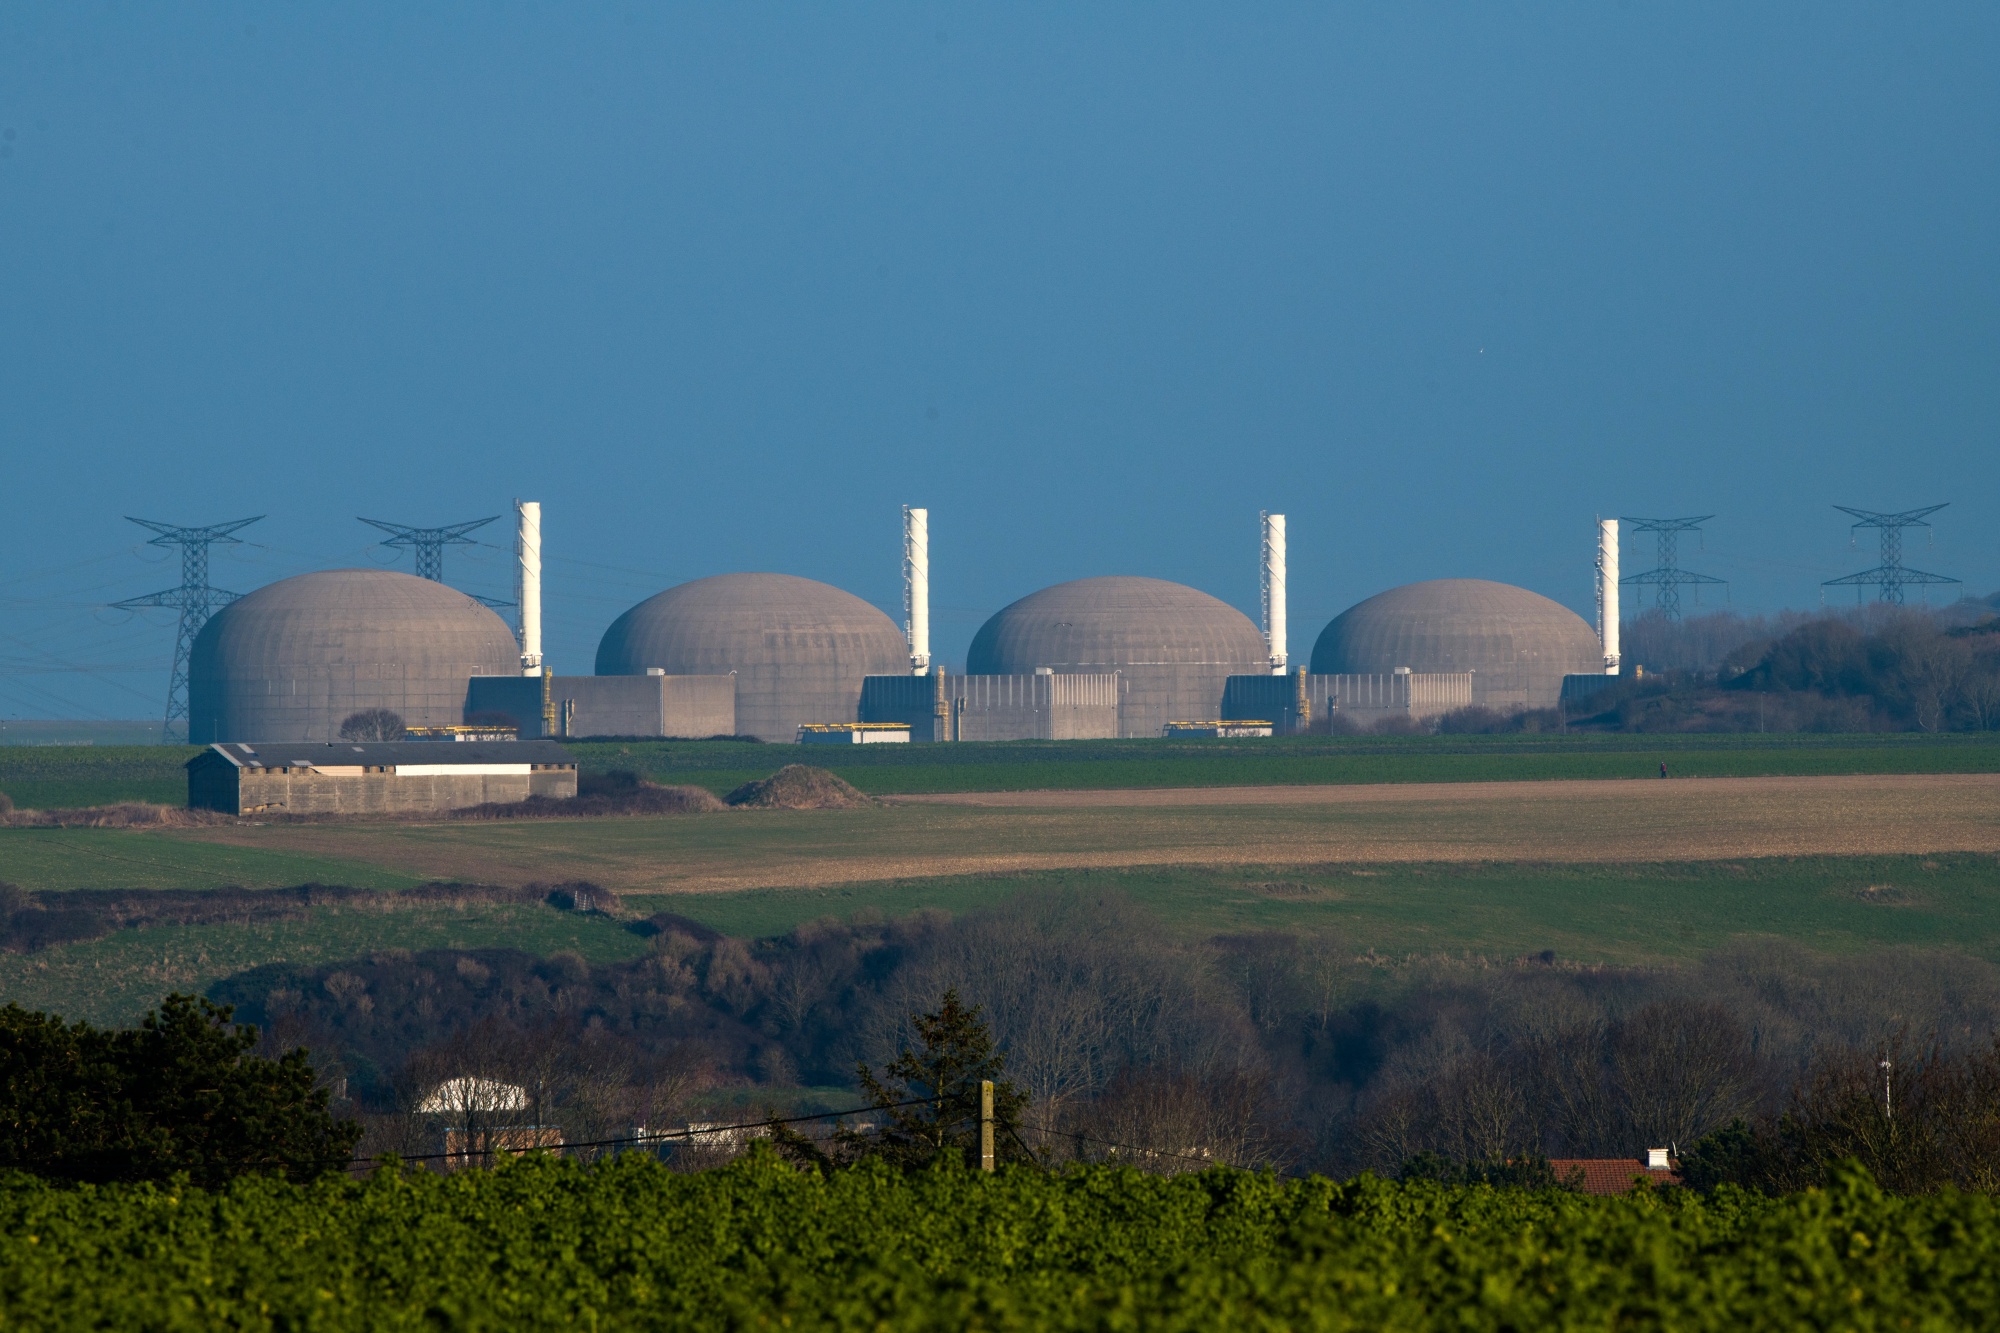 The Paluel nuclear power plant, operated by Electricite de France SA (EDF), in Paluel, France.